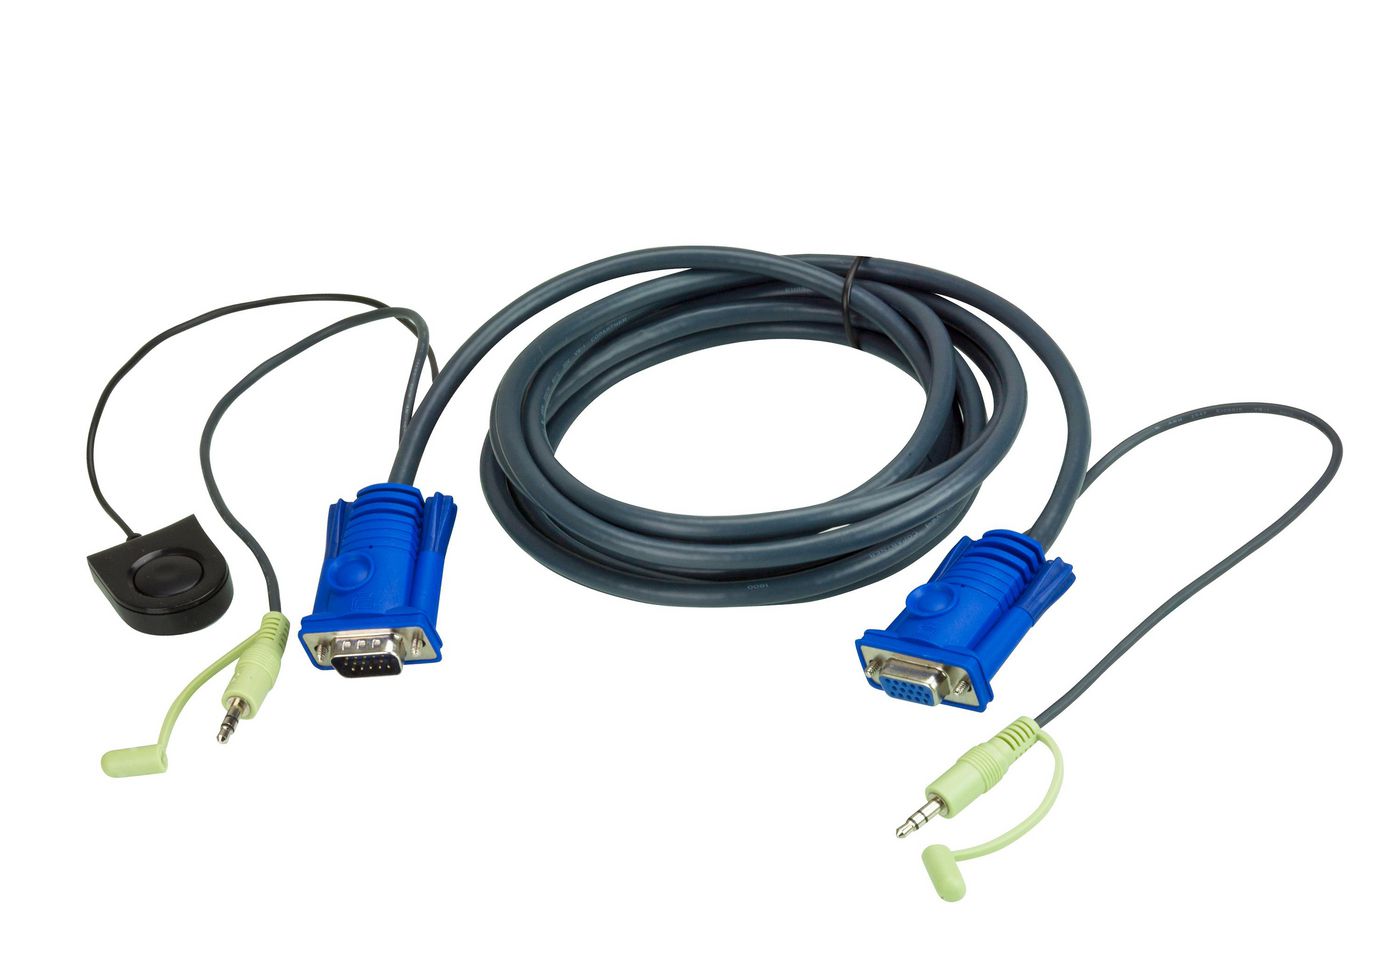 Aten 2L-5203B Port Switching VGA Cable 